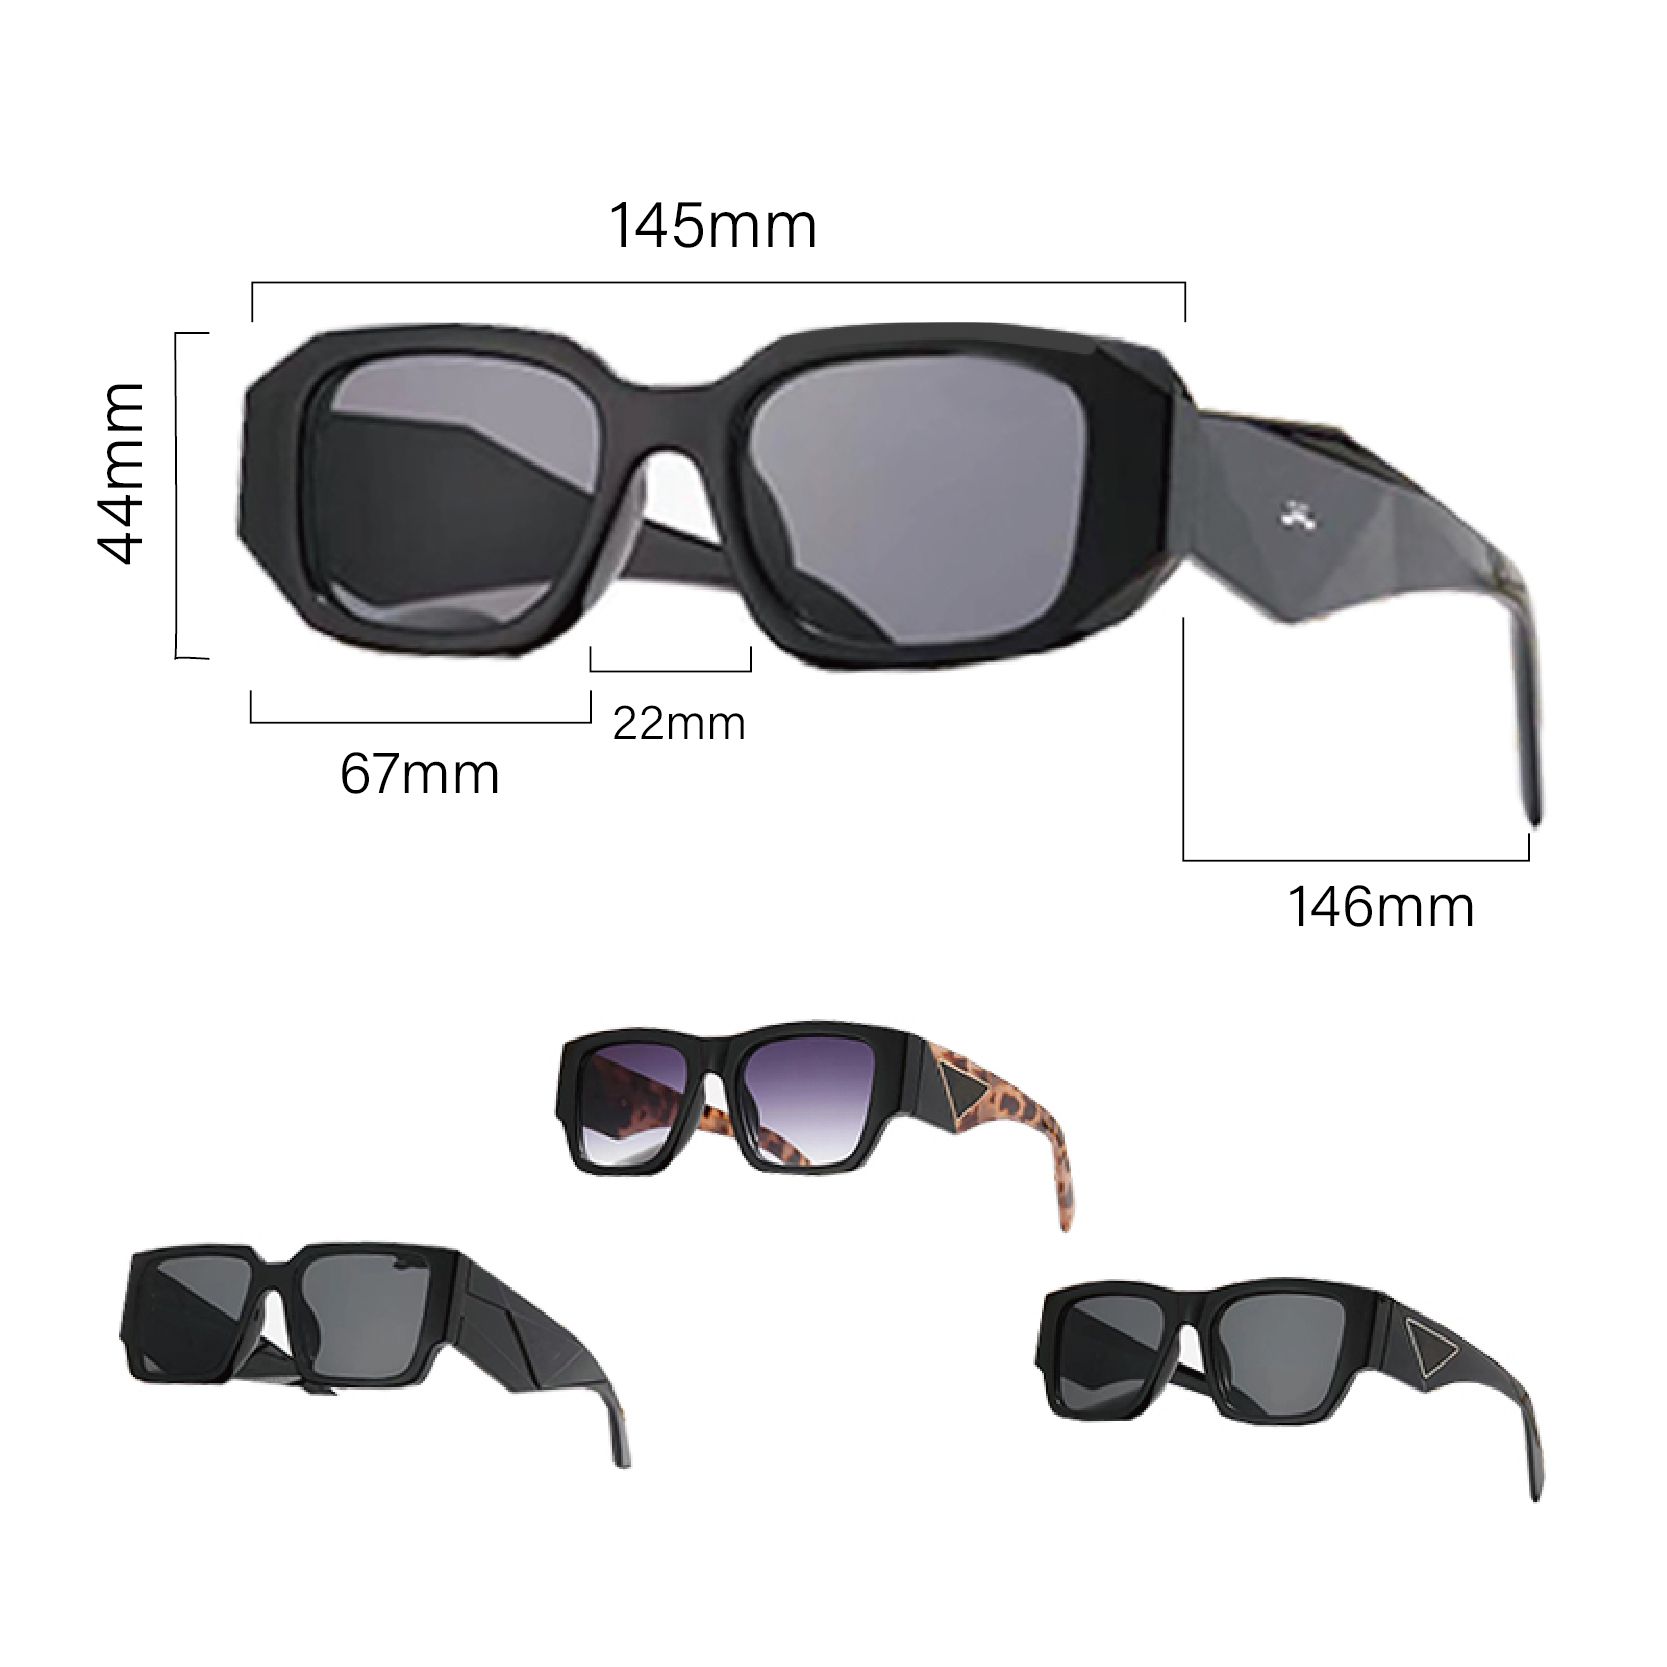 Stylish Frameless Beach Sunglasses For Men And Women With UV400 Protection  And Buffalo Horn Design From Jony88, $9.84